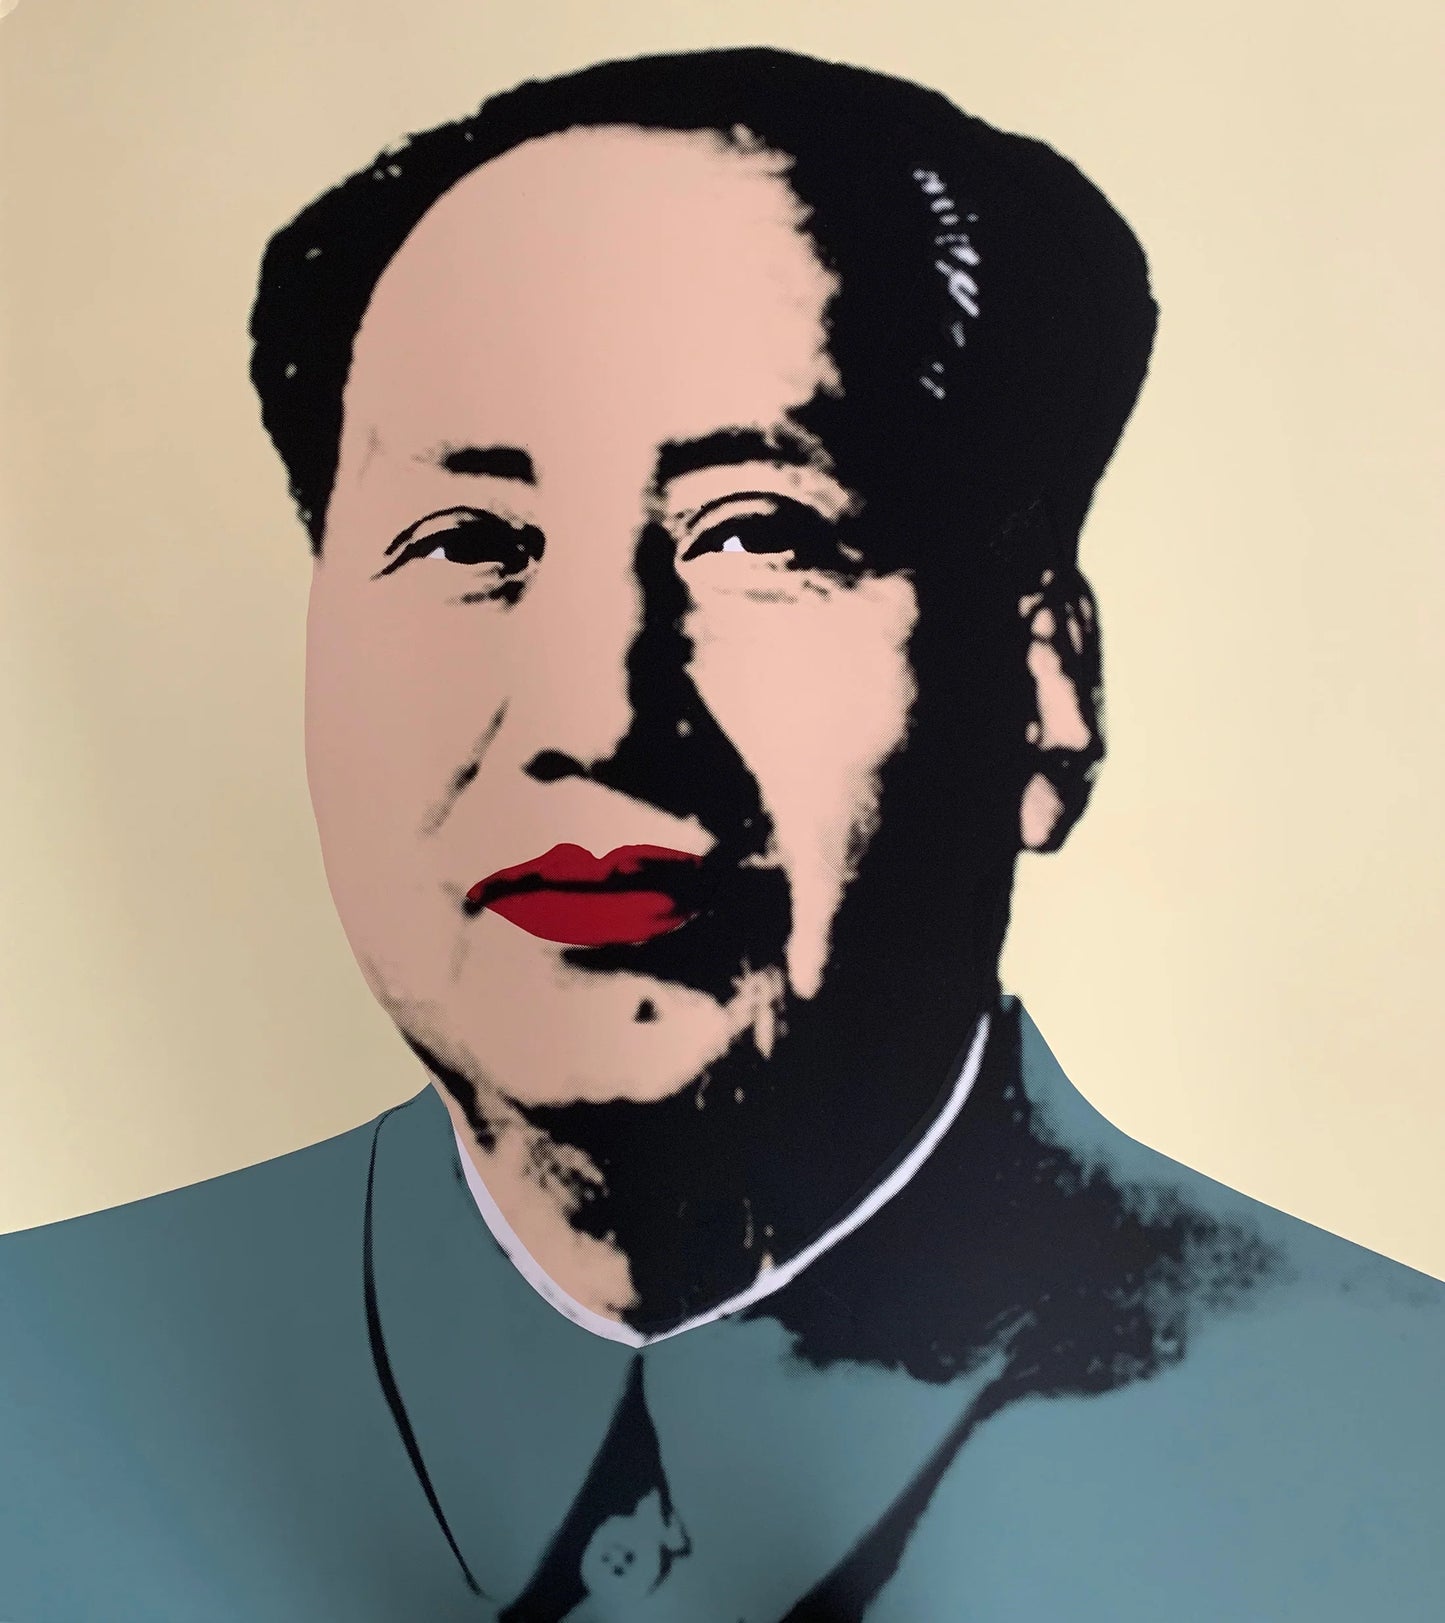 this is an image of a sunday b morning print after andy warhol titled 'mao yellow'. the artwork features a screenprint image of general mao on a yellow background, with mao's face colourised in beige with red lips and a blue uniform. the shadows in the image are black. this is a sunday b morning print for sale.